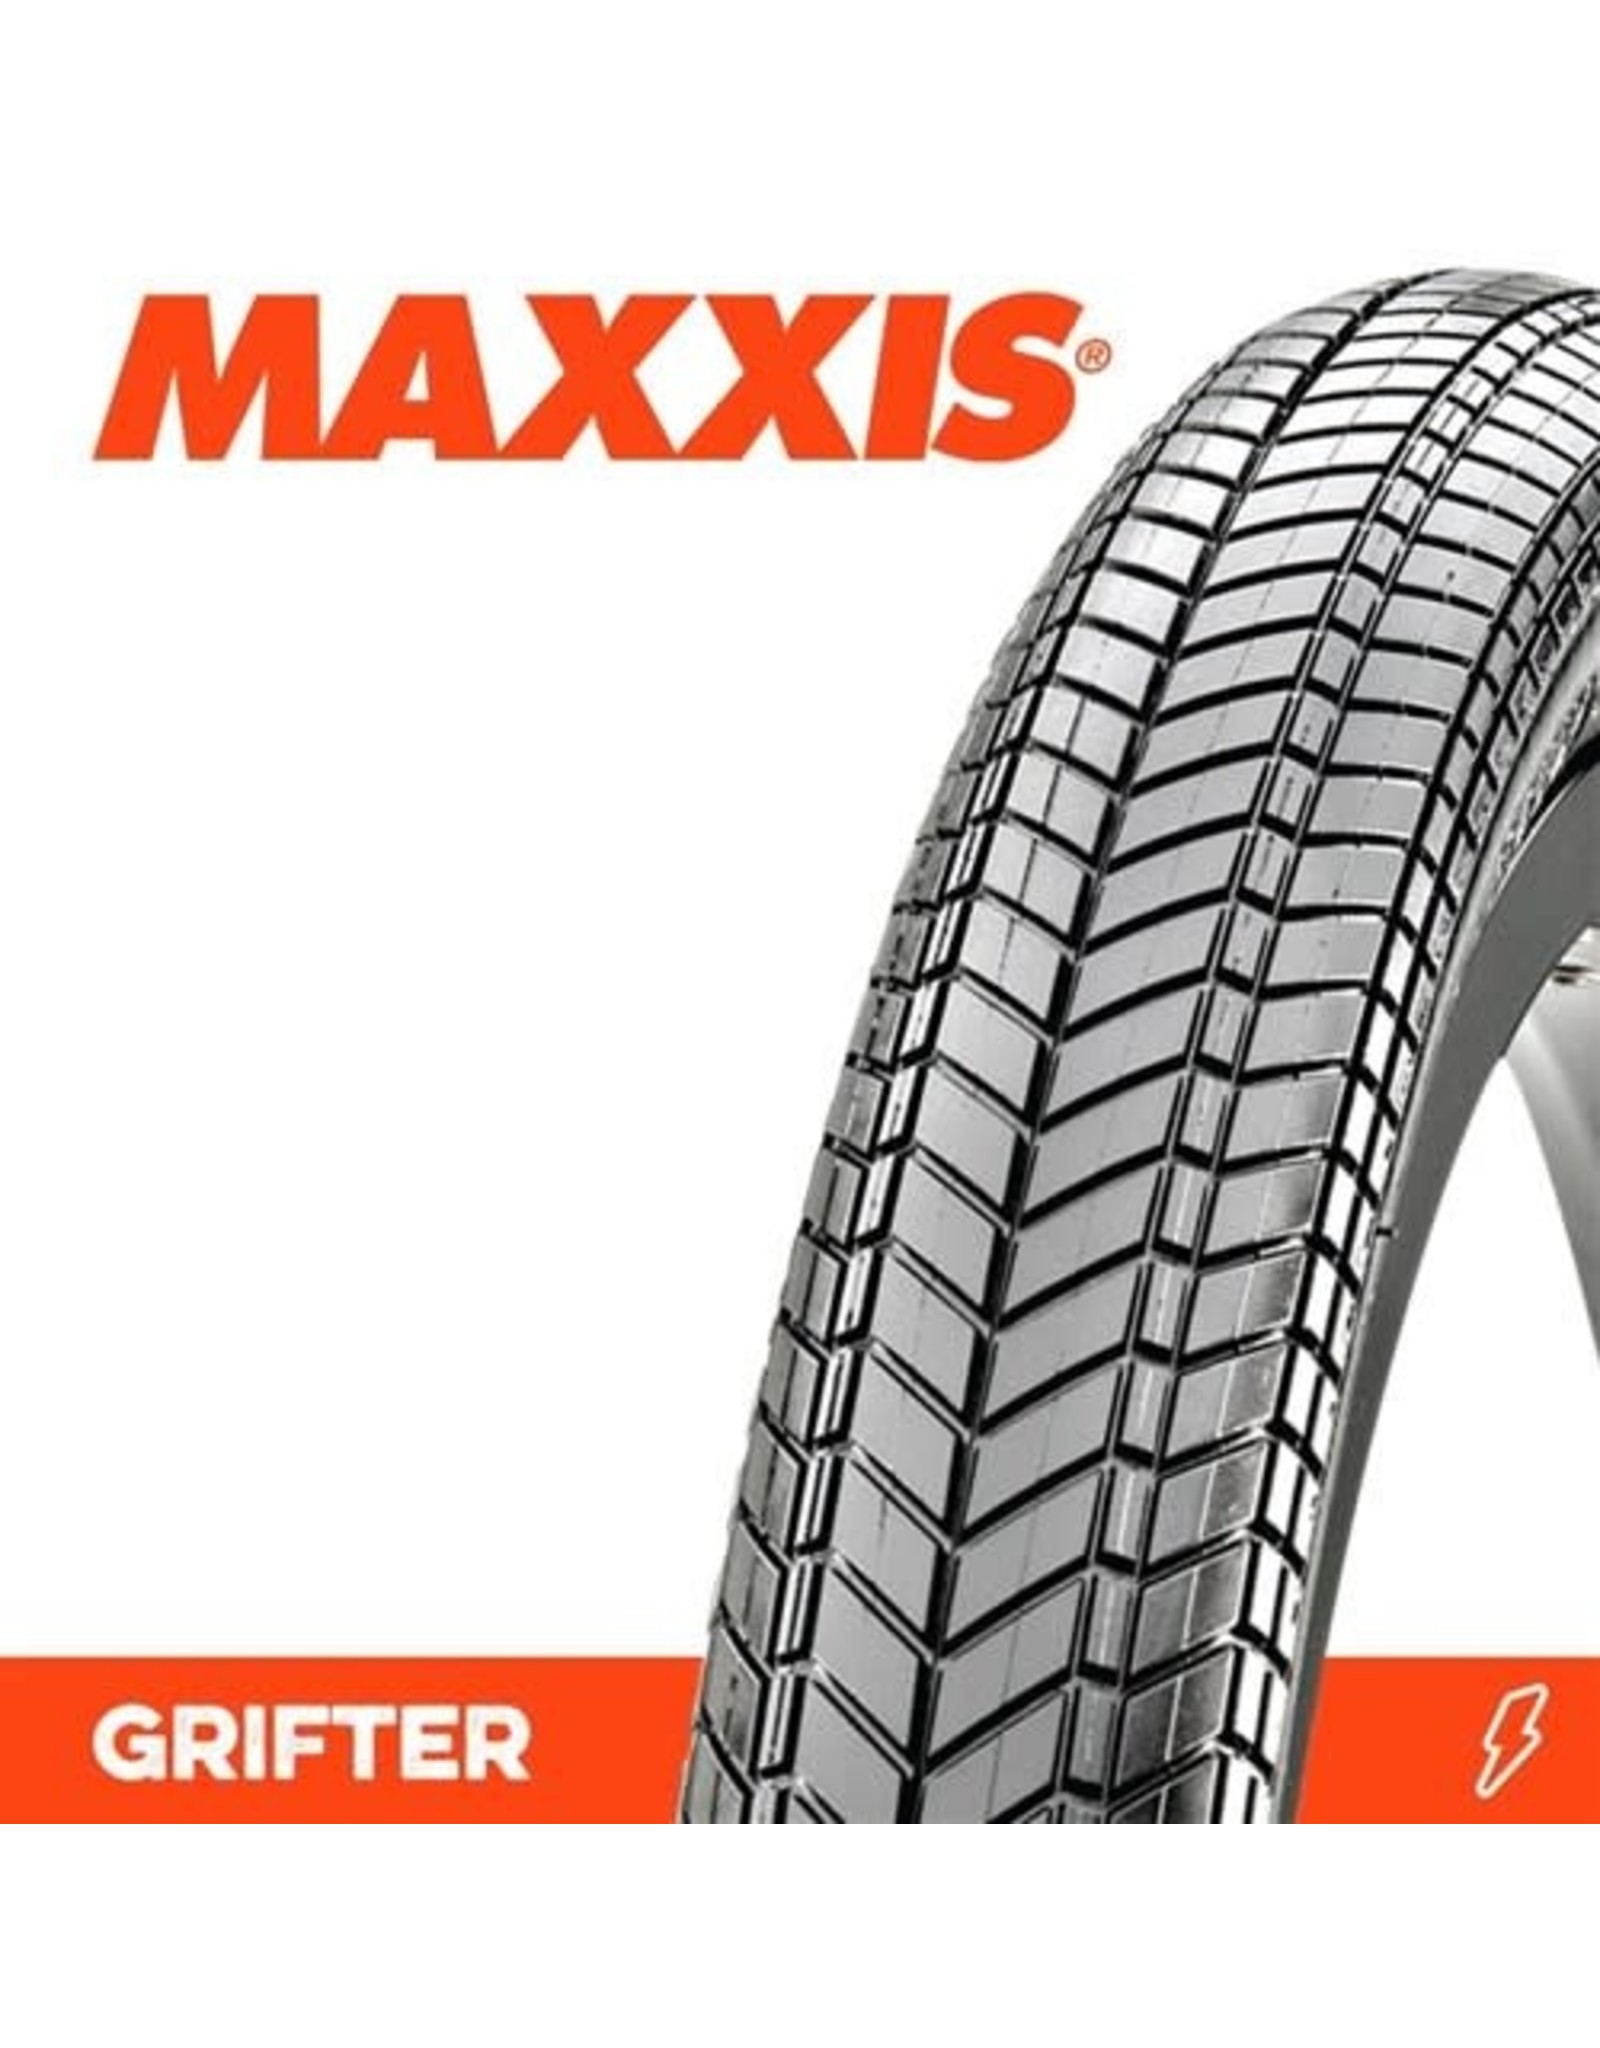 MAXXIS MAXXIS GRIFTER 20 X 2.40” 60X2 FOLD 60TPI TYRE